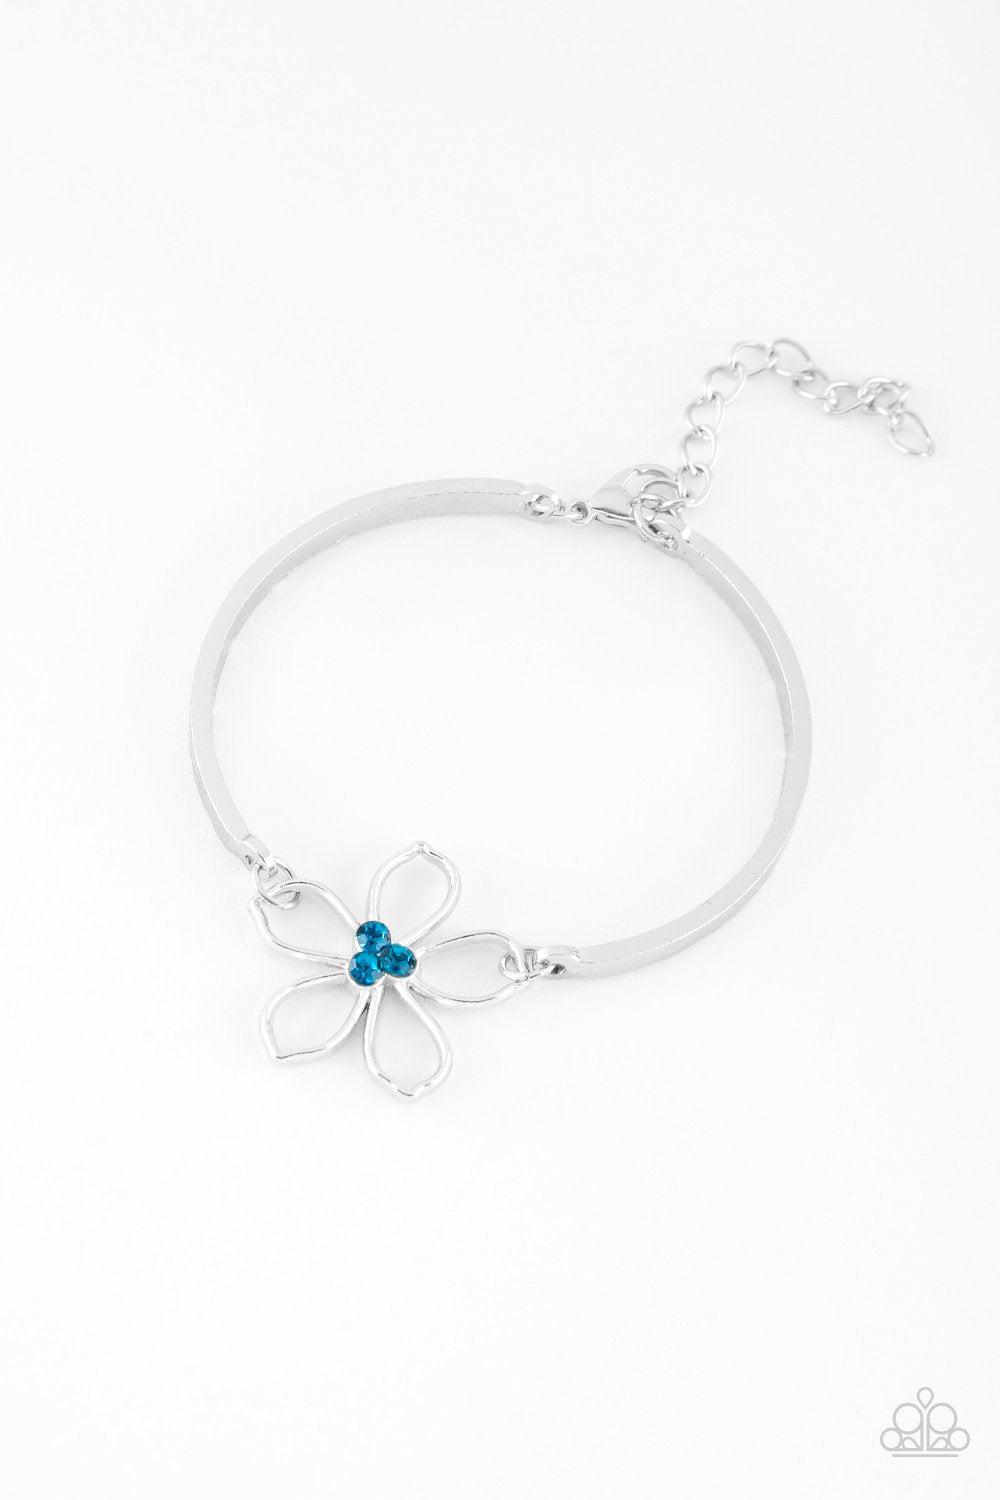 Hibiscus Hipster Blue Rhinestone and Silver Flower Bracelet - Paparazzi Accessories- lightbox - CarasShop.com - $5 Jewelry by Cara Jewels